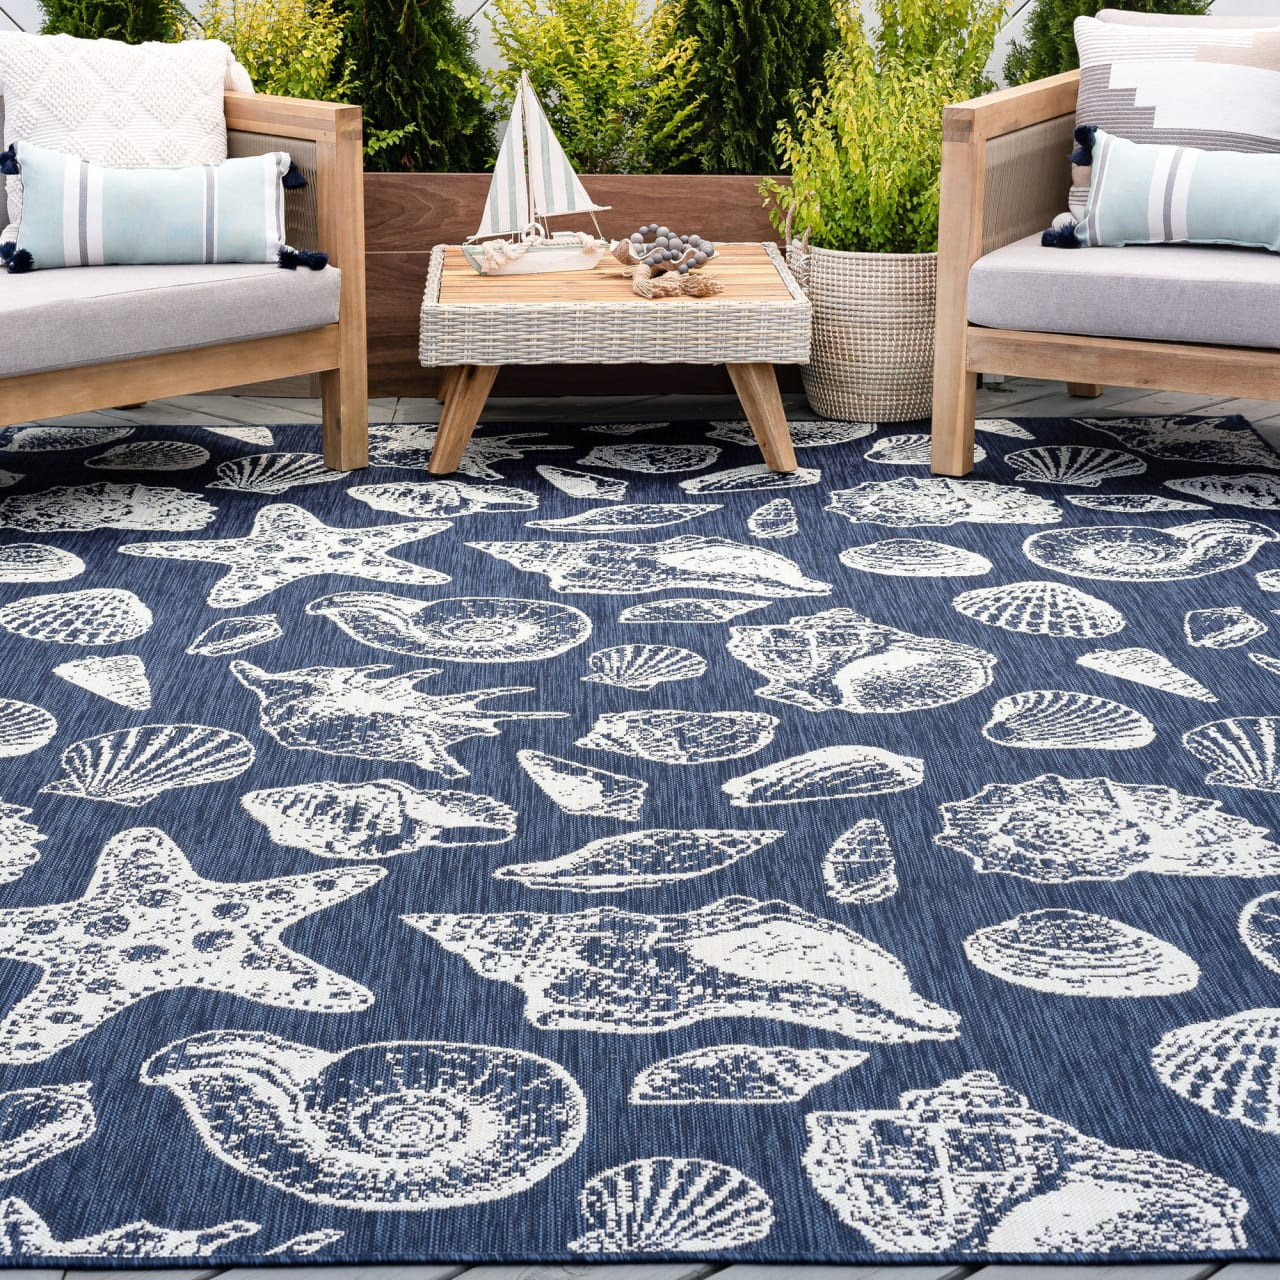 https://cdn11.bigcommerce.com/s-19e3ldoqy0/images/stencil/1280x1280/products/437/116163/decorsify-Rugs-Eco-ECO1405_4x6-Navy-Polypropylene-Novelty_Lifestyle_Image__07157.1662991634.jpg?c=1